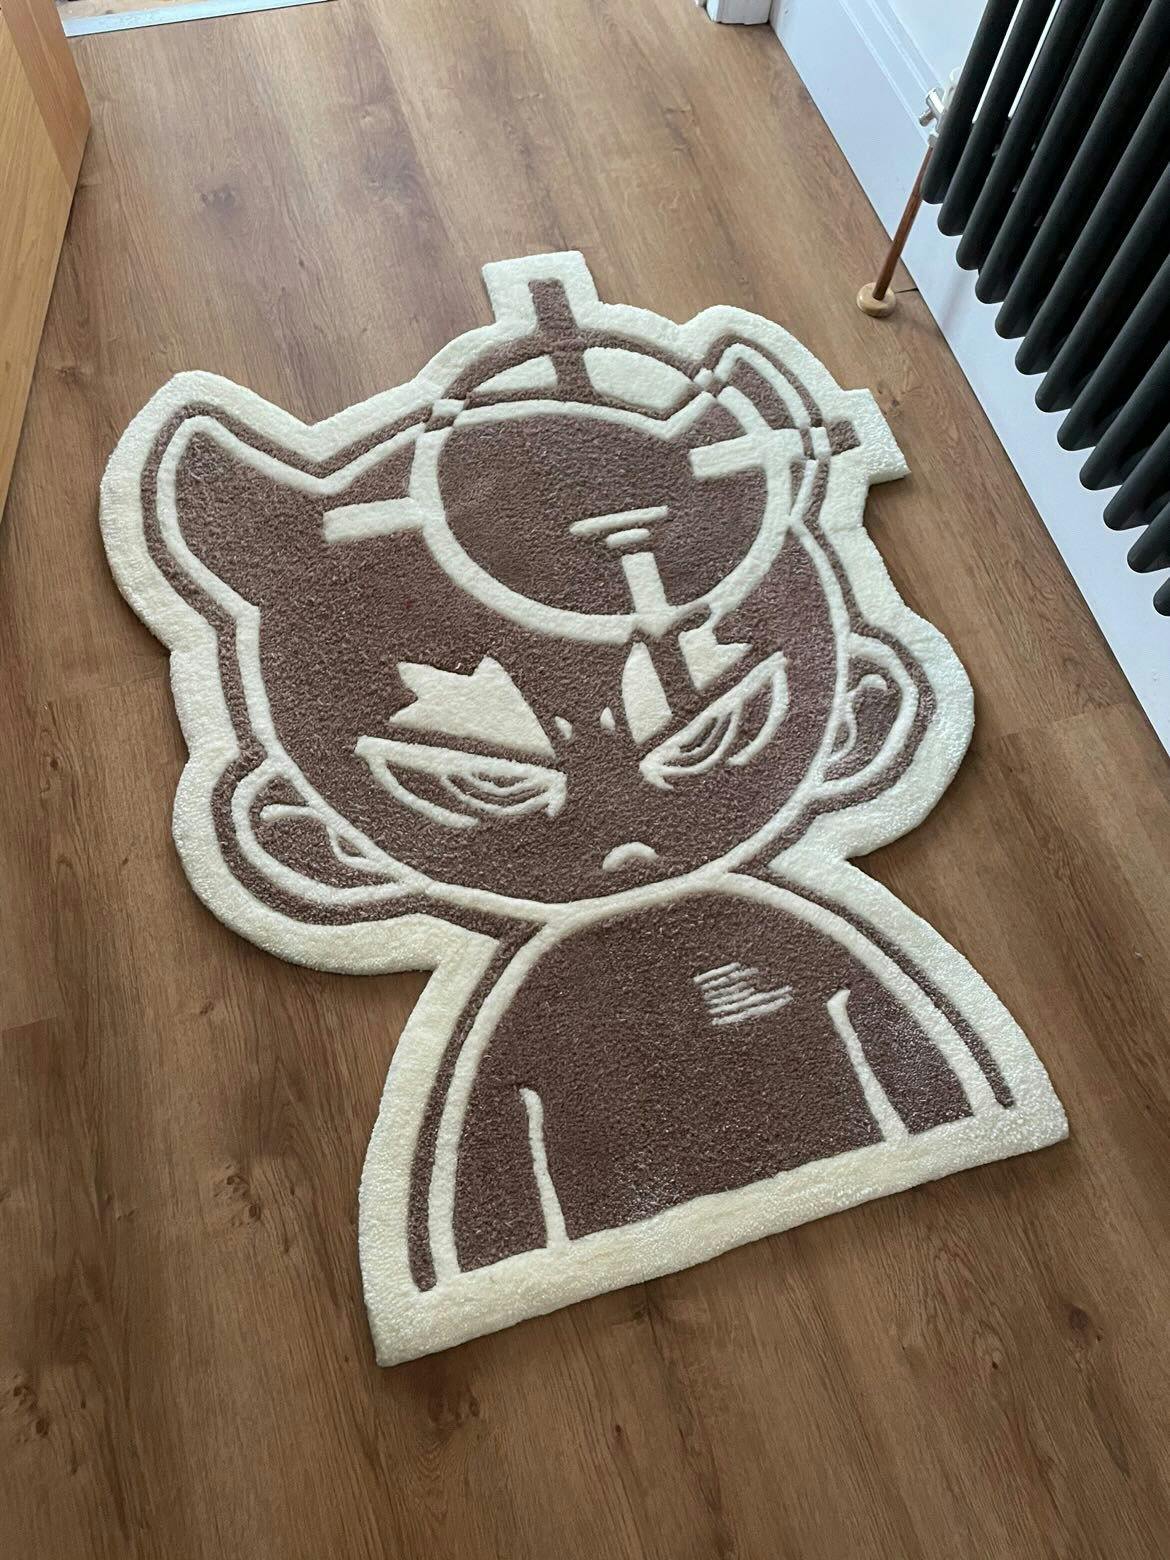 Hand-made tufted wanted Little Devil rug